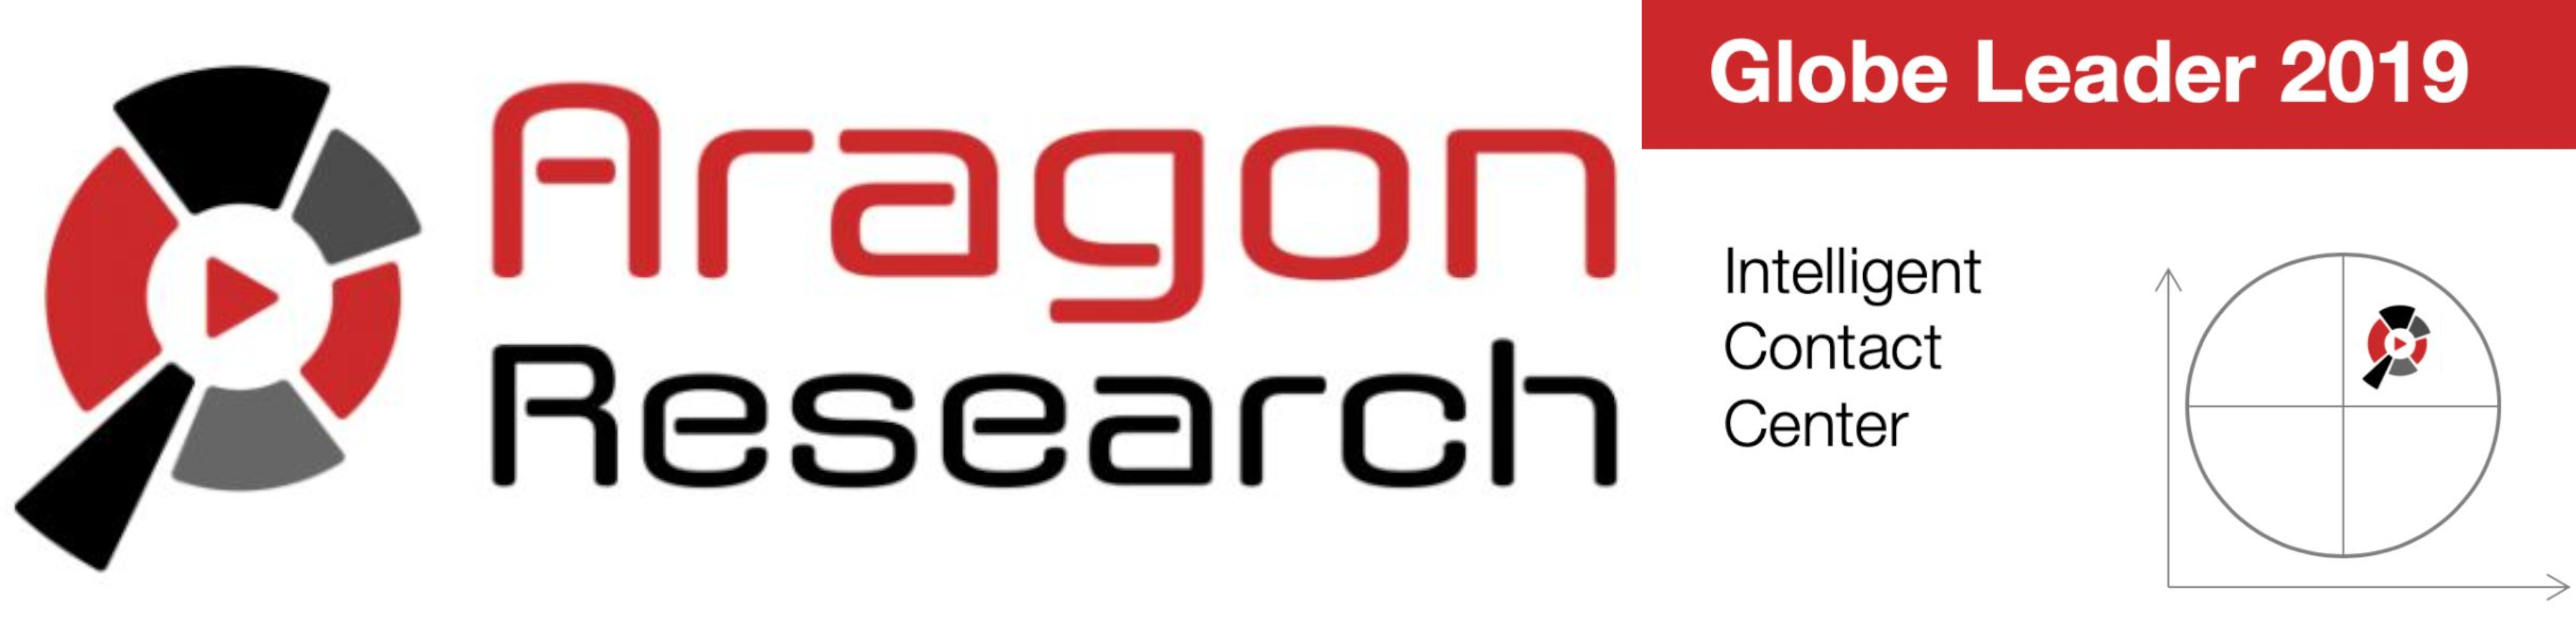 Aragon Research 2019 Globe Leader for Intelligent Contact Centers Award logo